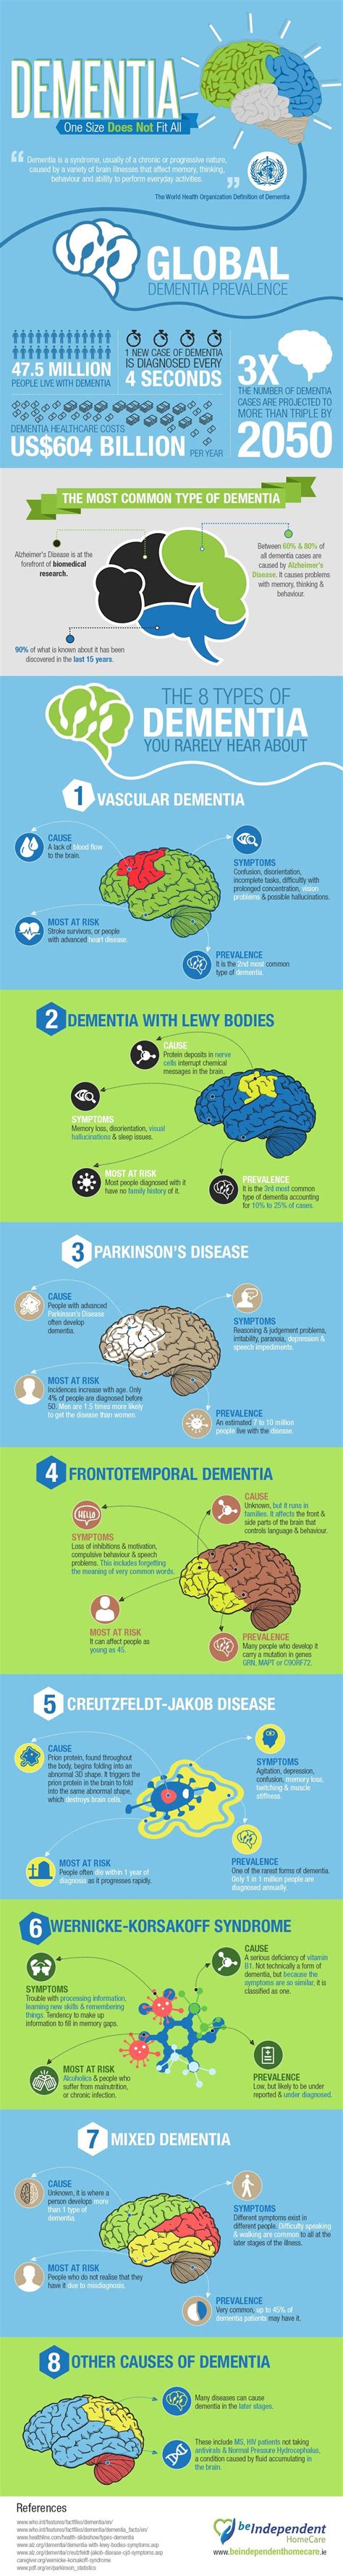 Did you know that not all dementia is Alzheimer's dementia? There are many types of dementia ...